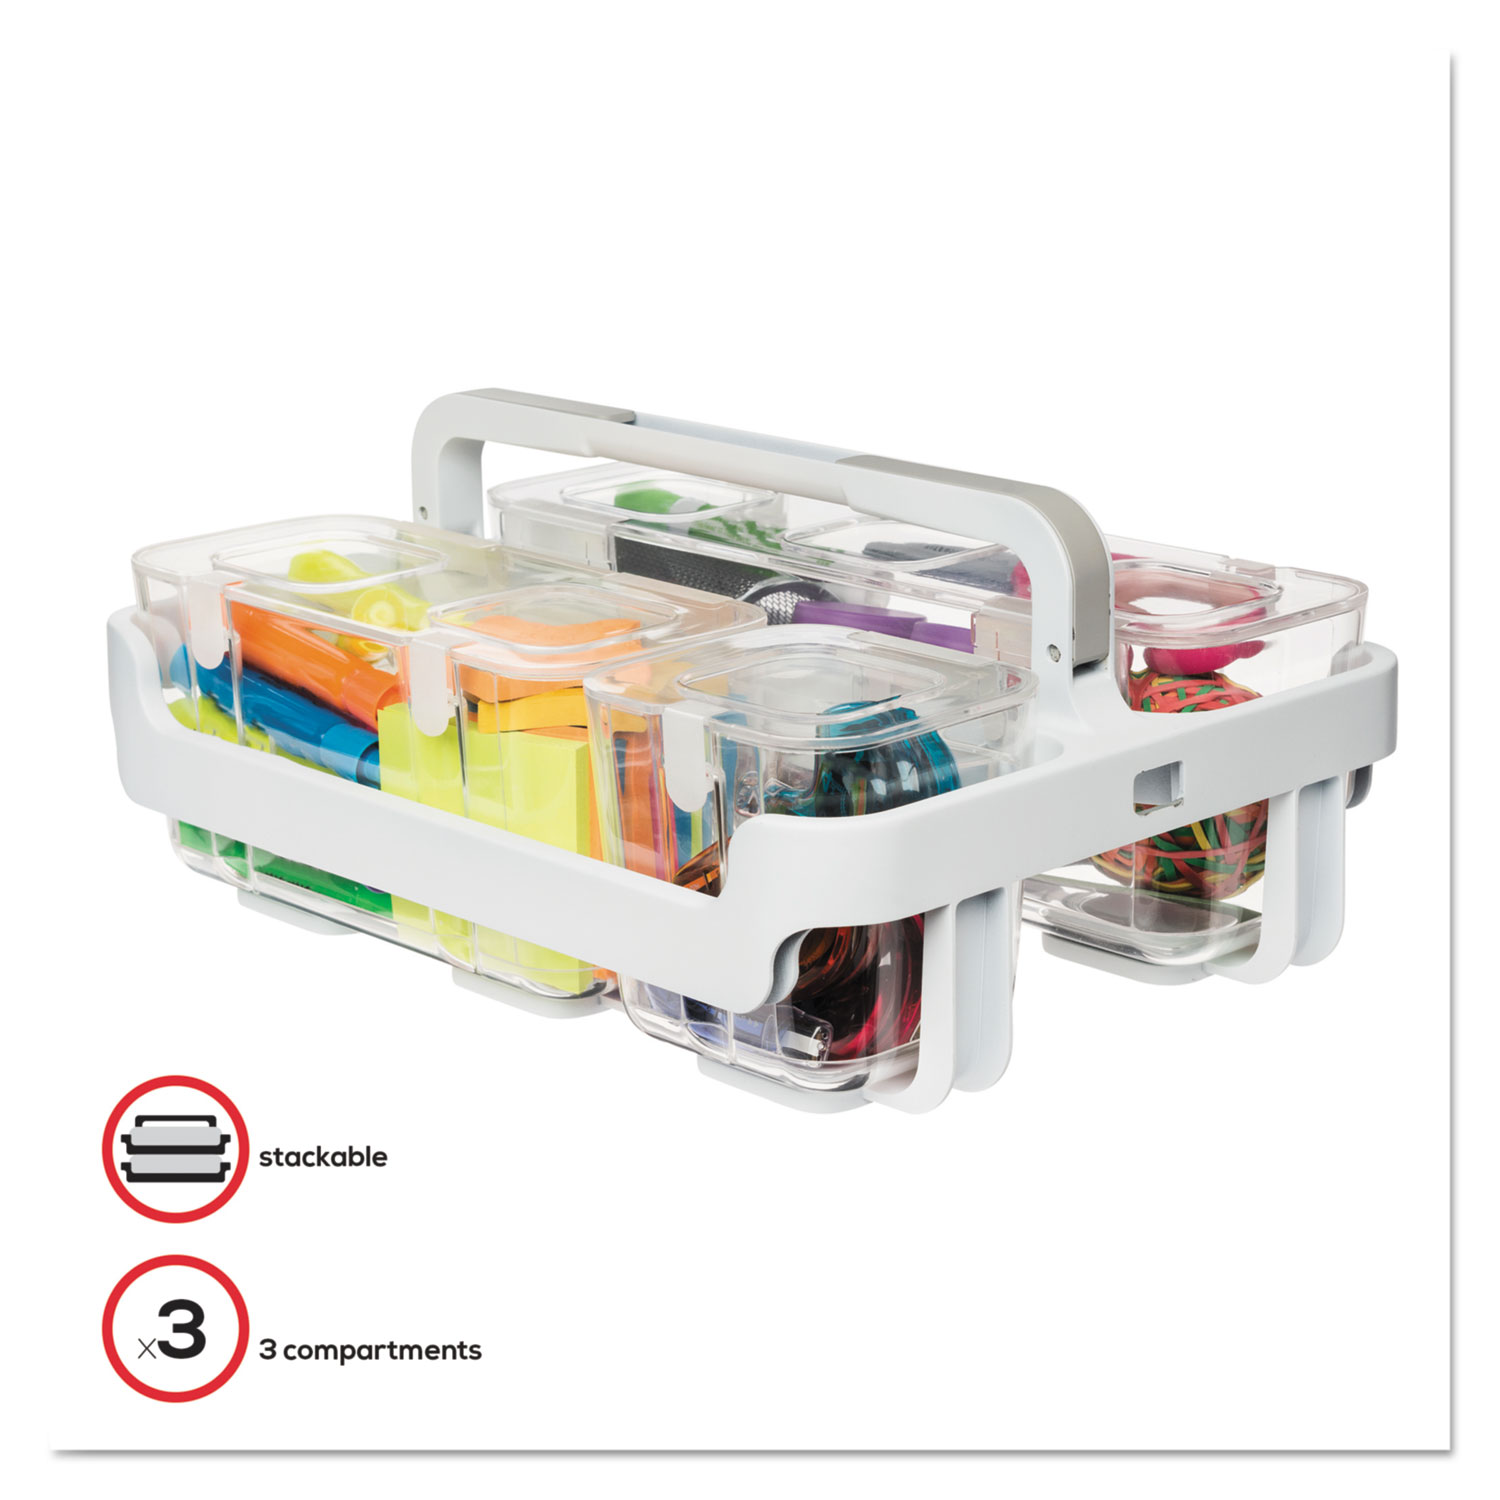  deflecto 29003 Stackable Caddy Organizer w/ S, M & L Containers, White Caddy, Clear Containers (DEF29003) 